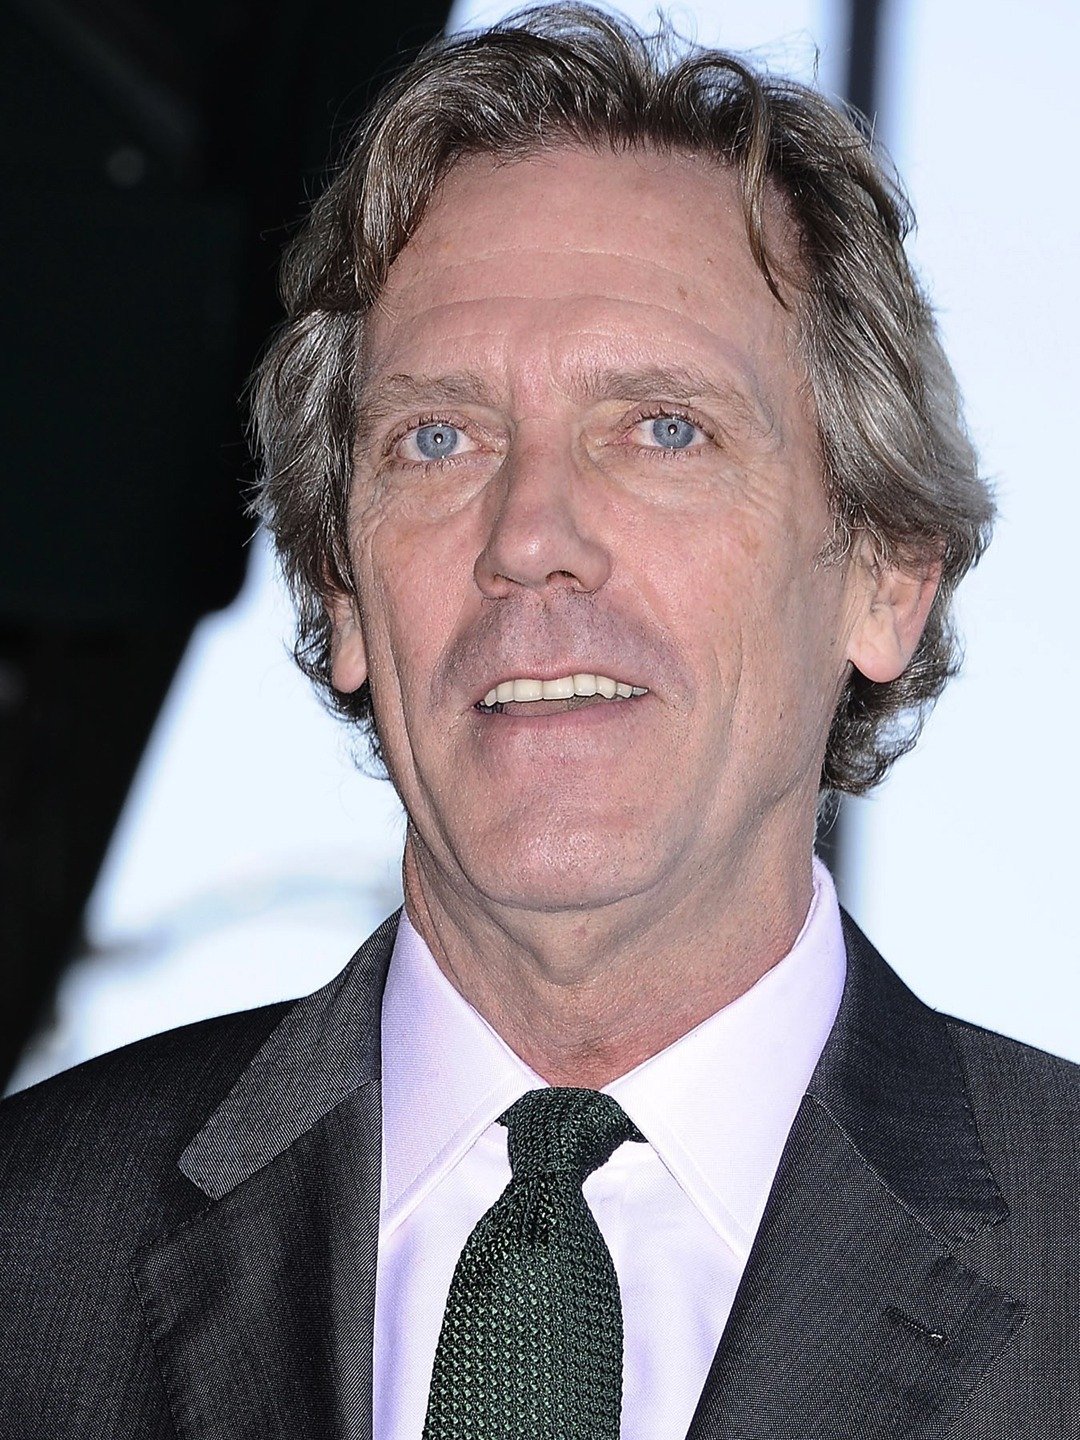 How tall is Hugh Laurie?